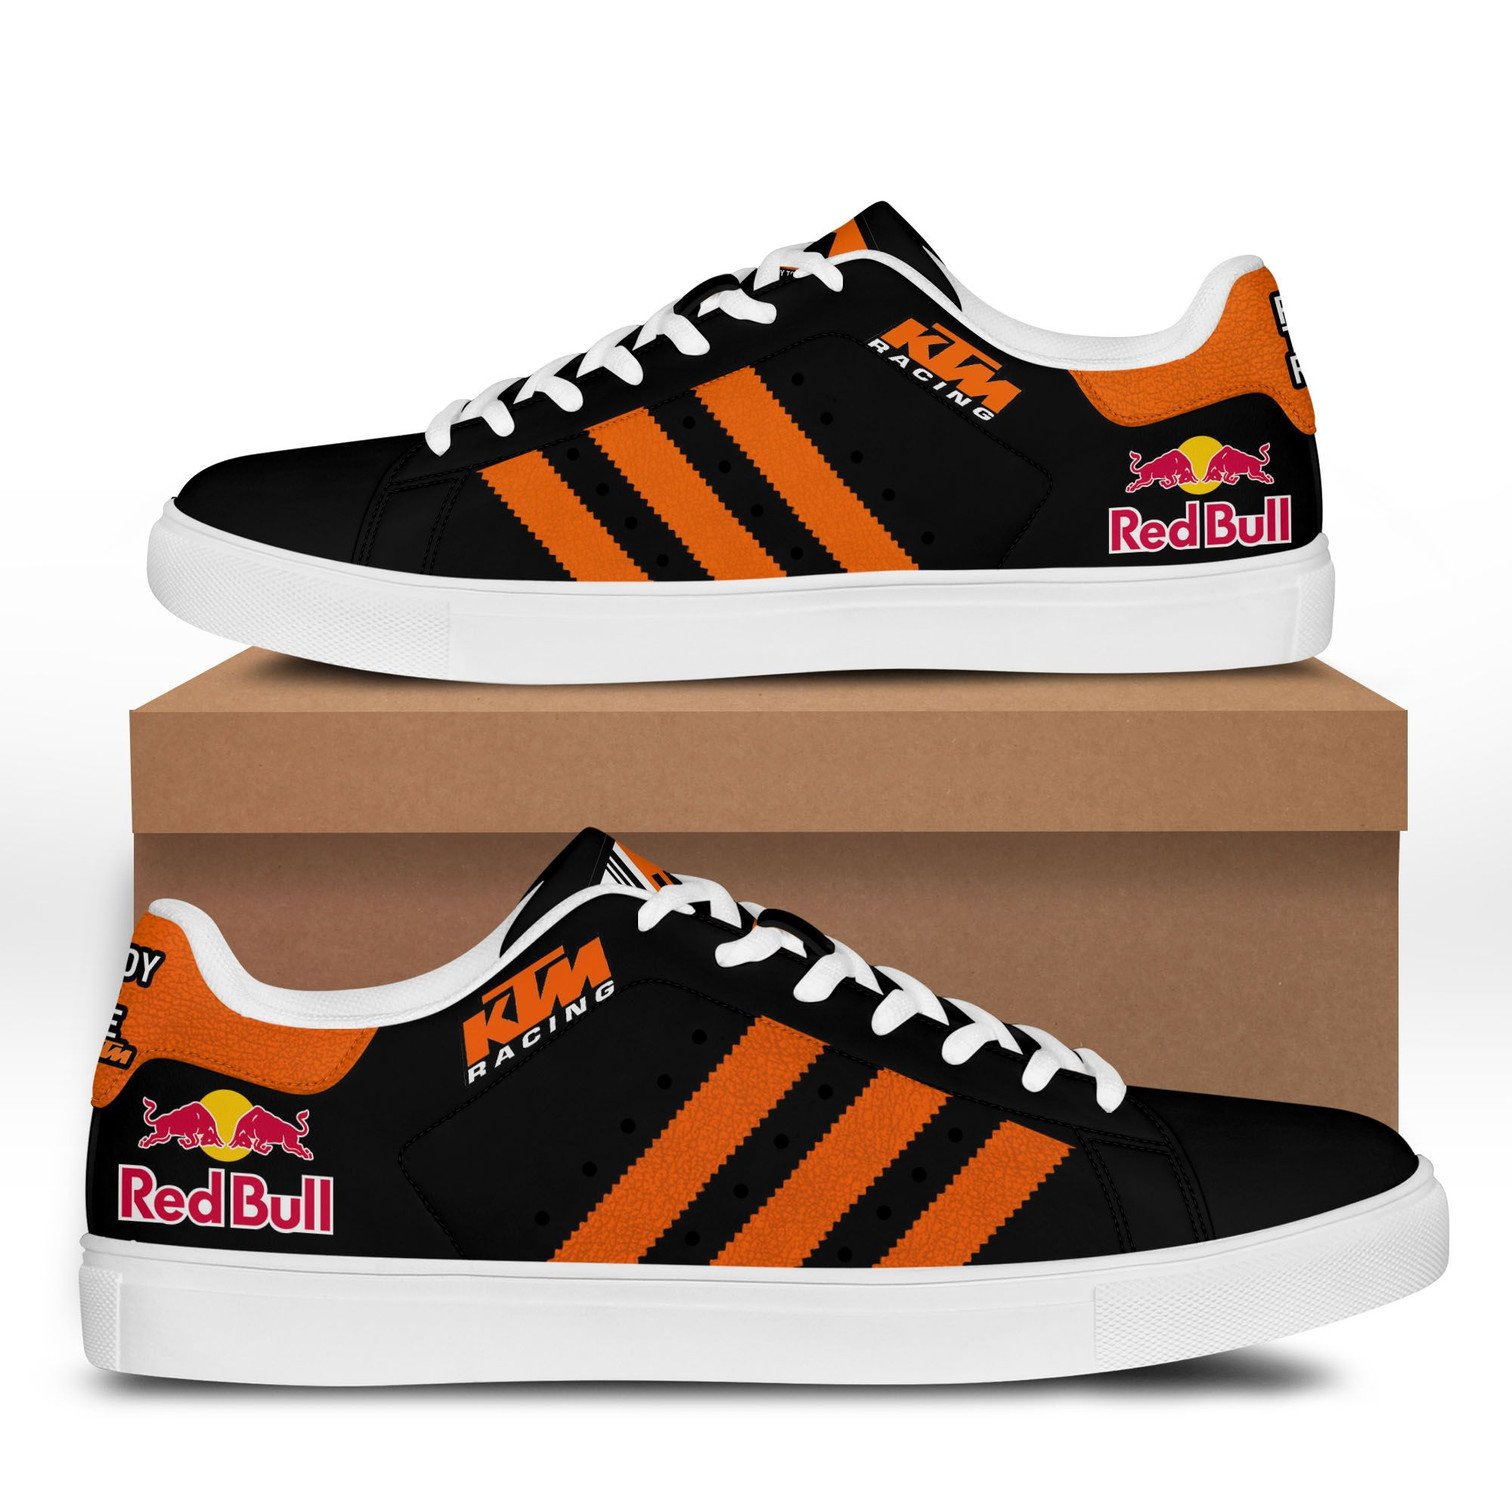 NEW KTM Racing Redbull Stan Smith Sneaker shoes 22